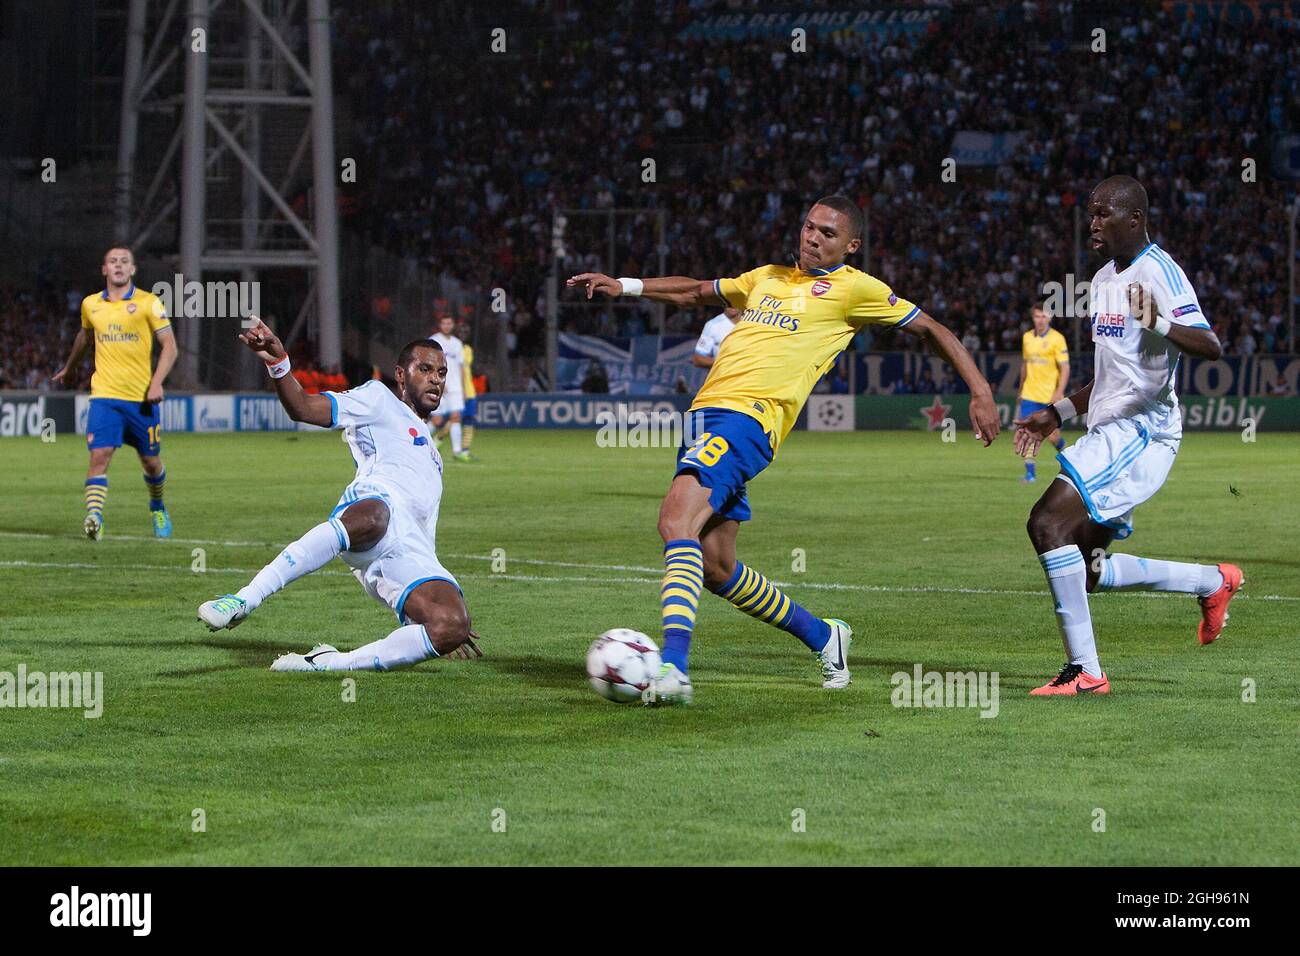 Arsenal's Kieran Gibbs shoots at goal during the UEFA Champions&#8217; League Group F match between Olympique de Marseille and Arsenal FC at Stade Velodrome Stadium in Marseille, France, on Sept. 18, 2013. Stock Photo